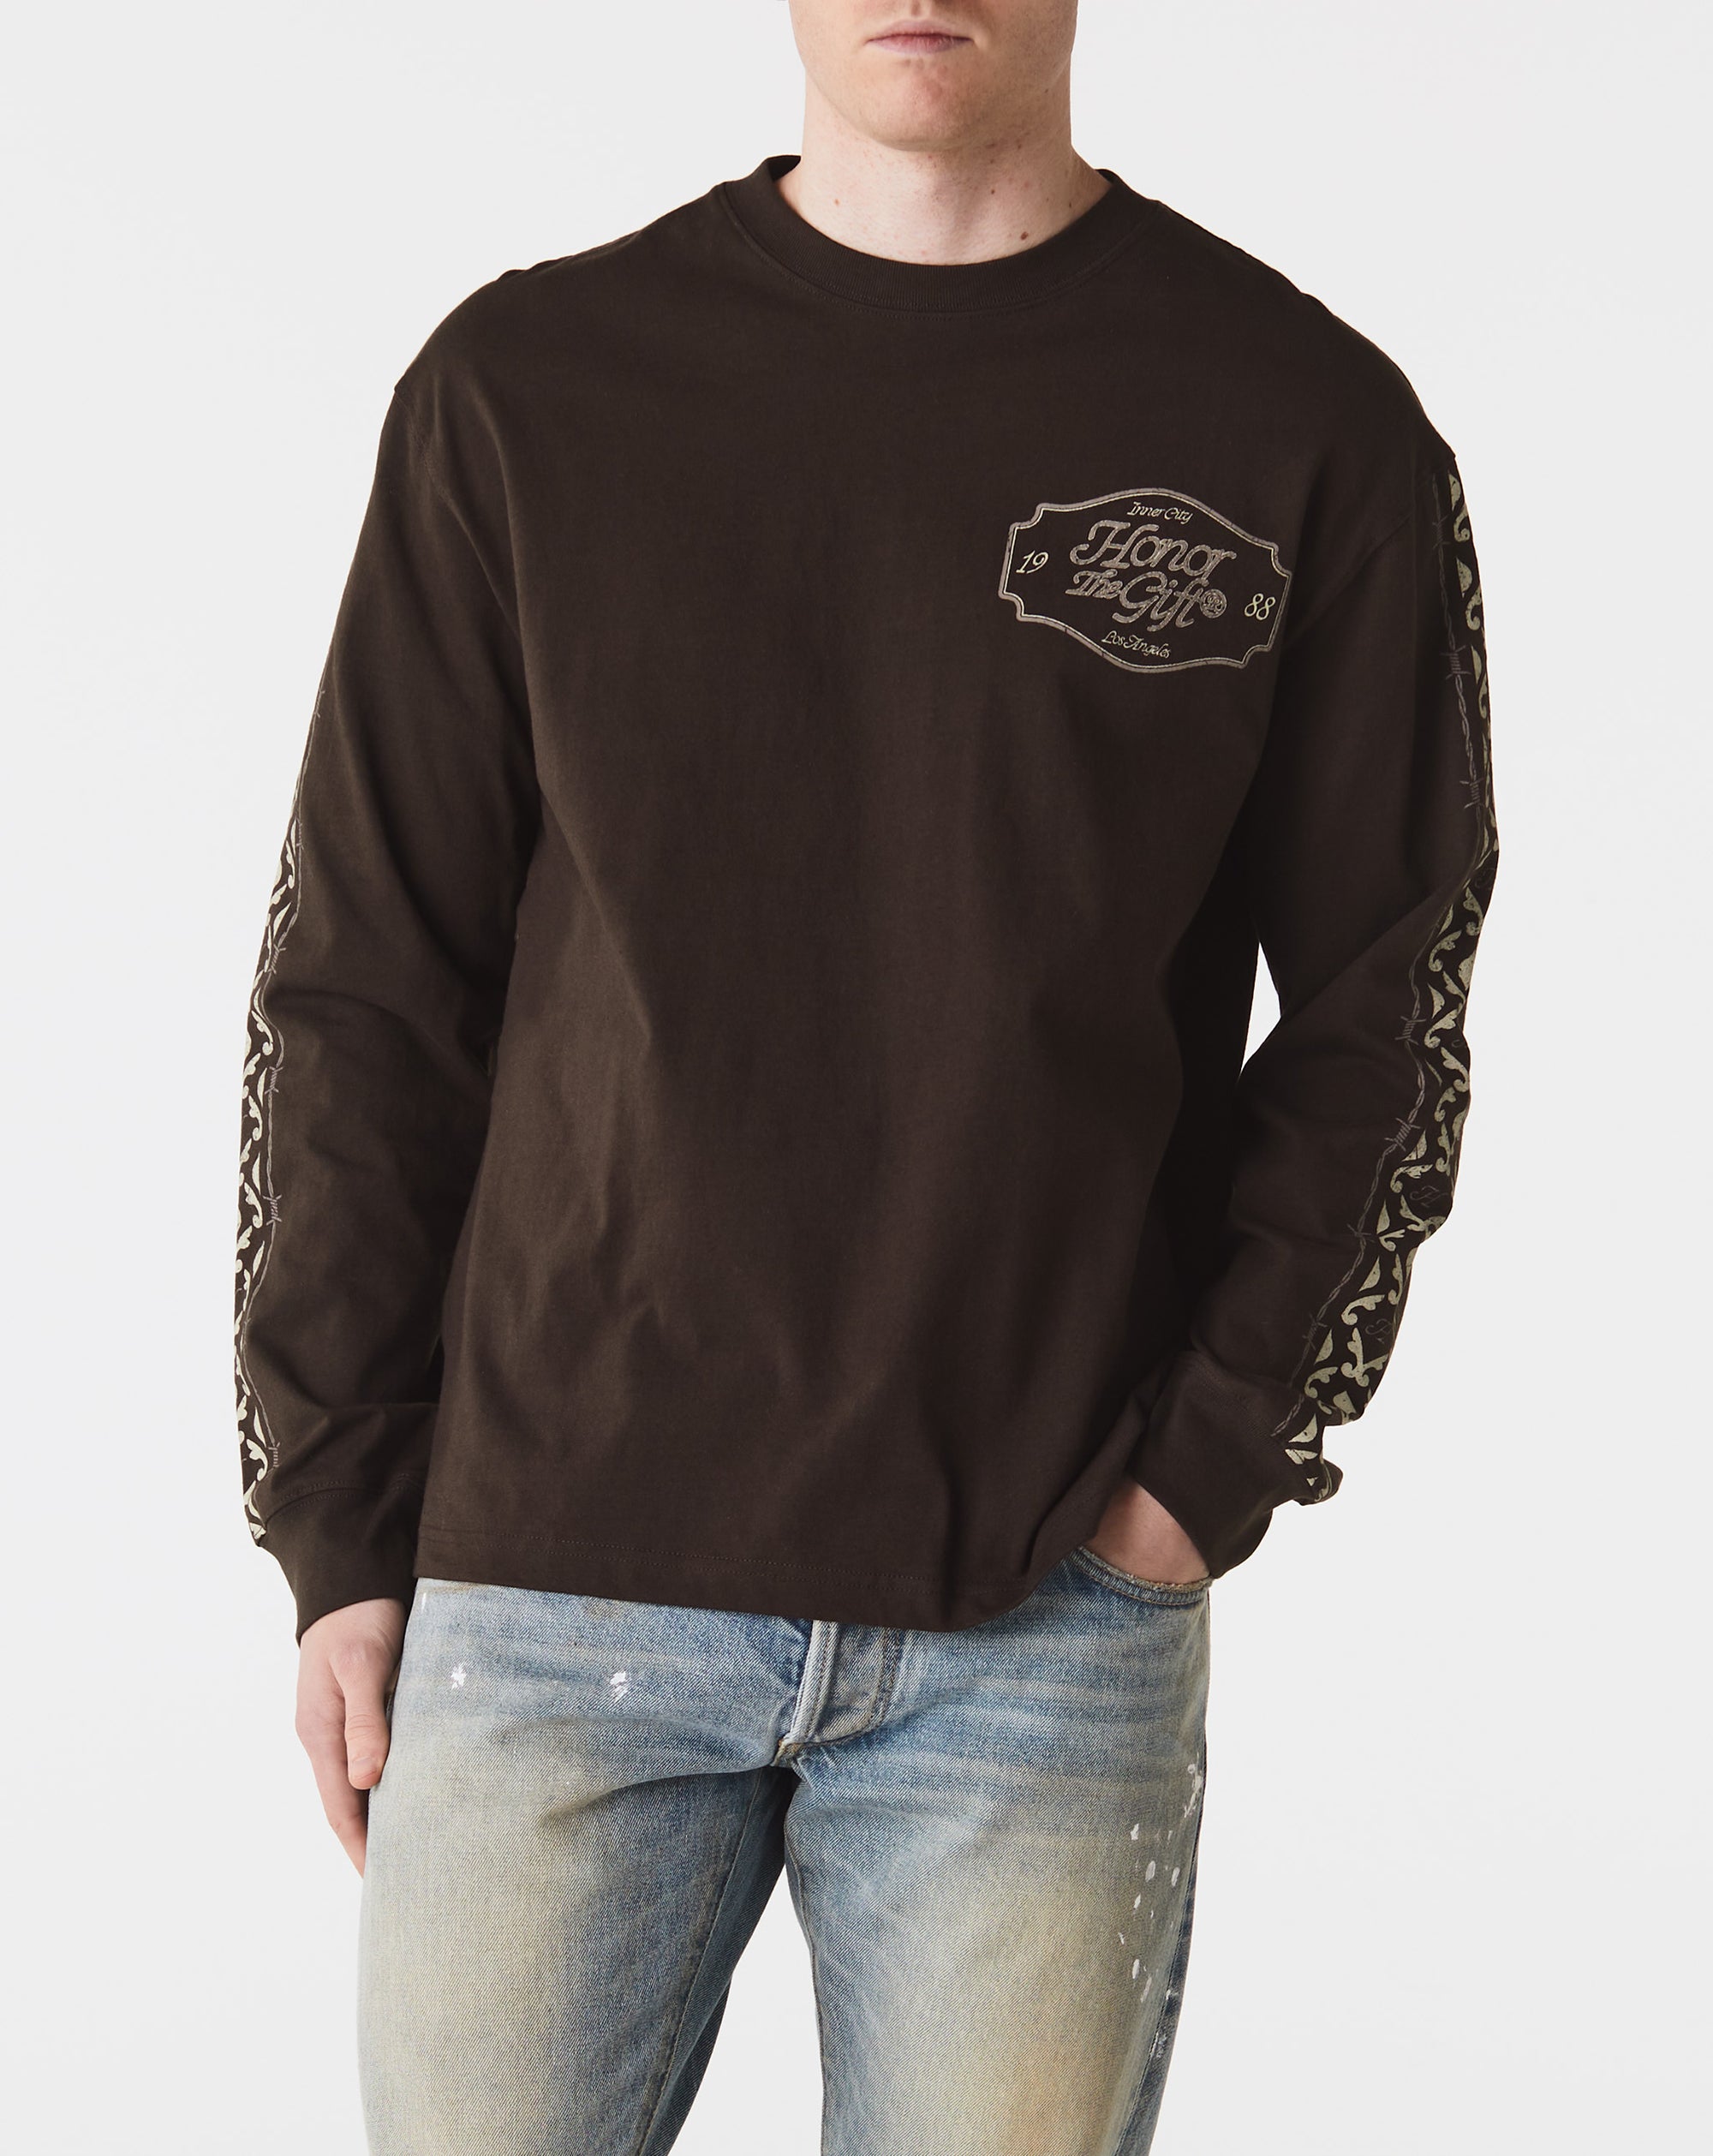 Honor The Gift Pattern Long Sleeve T-Shirt - Rule of Next Apparel